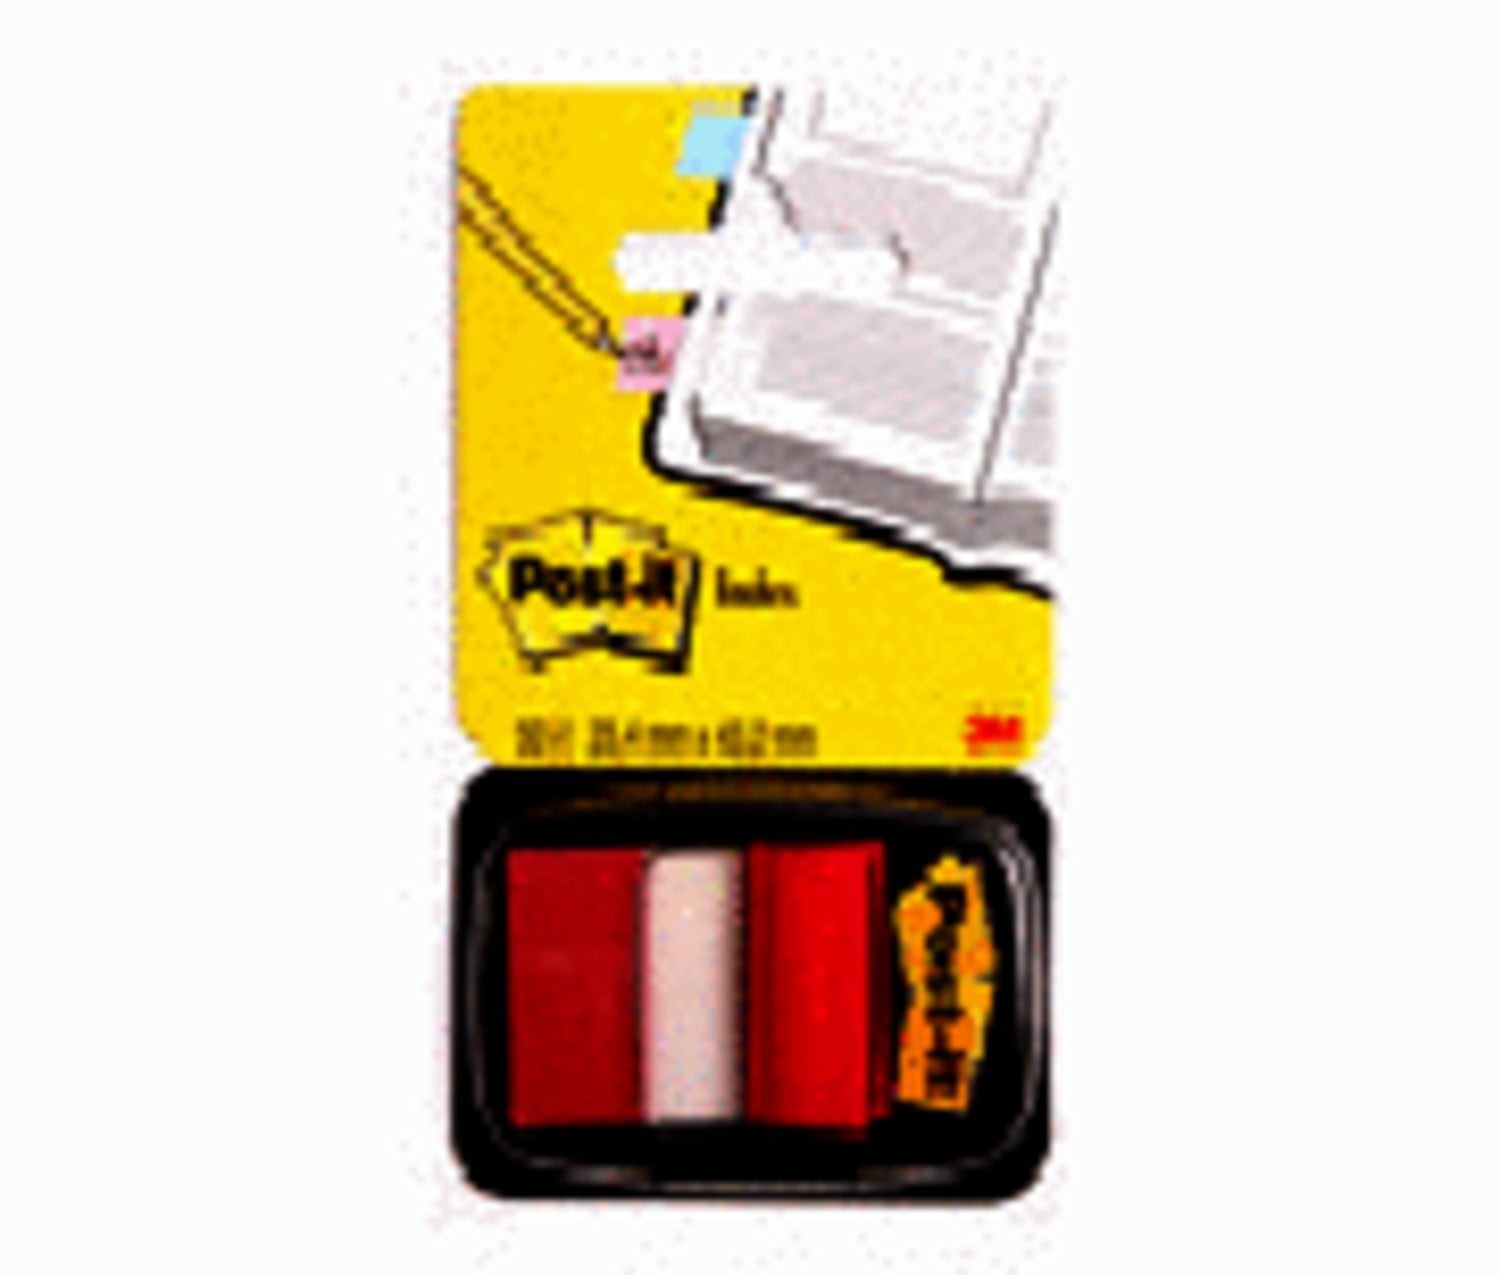 7000144926 - Post-it Flags 680-1 (36) 1 in x 1.7 in (25,4 mm x 43,2 mm) Red
50/dispenser